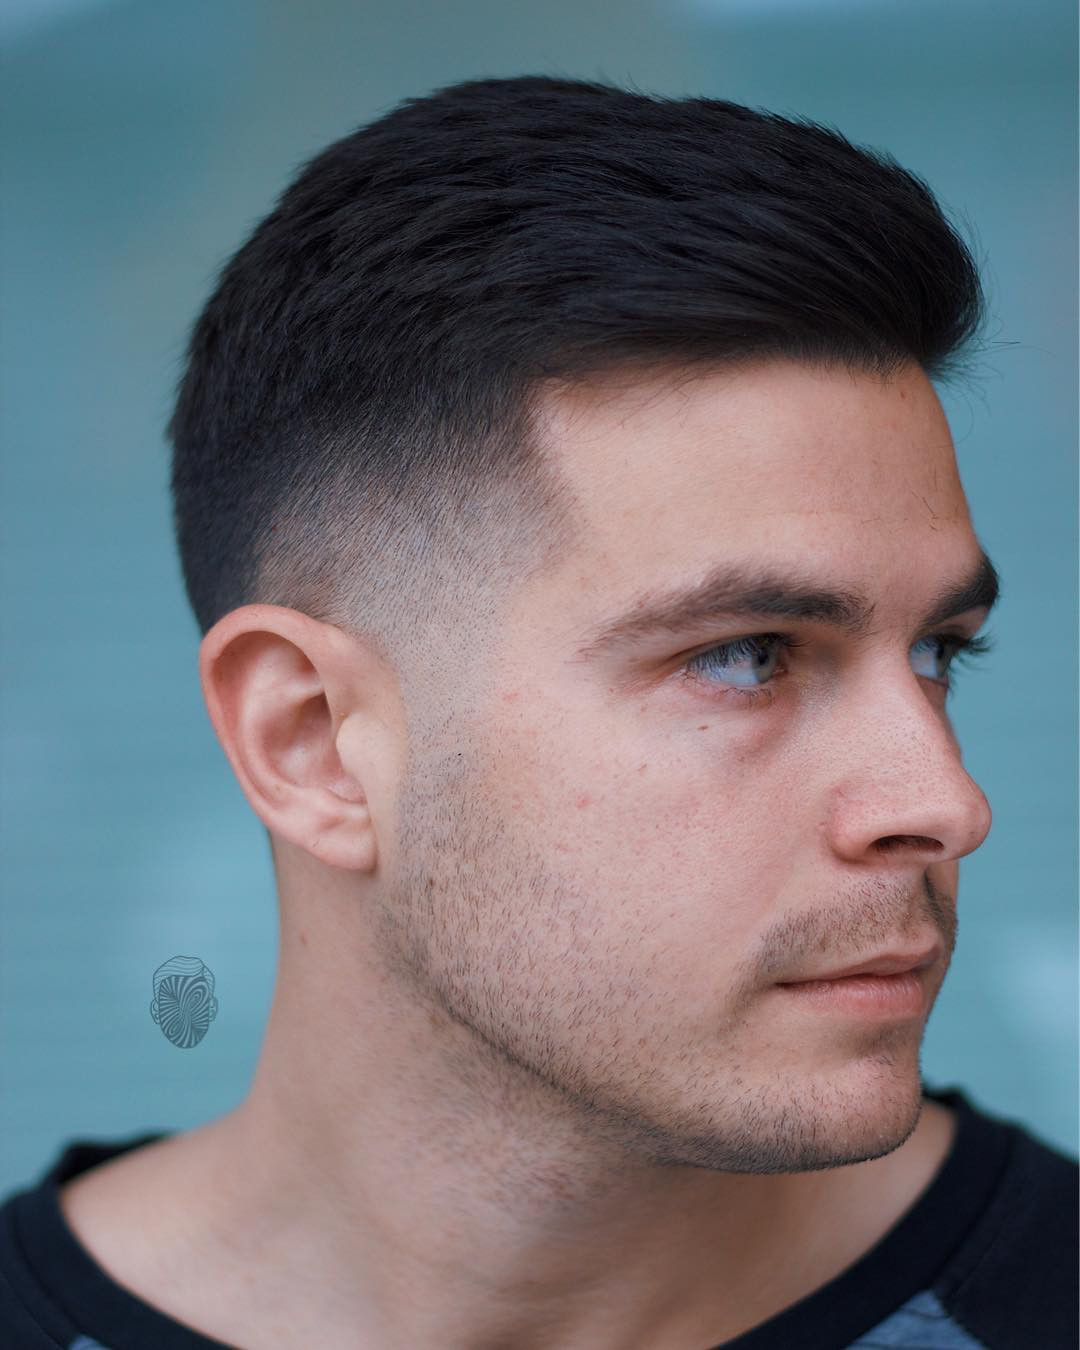 Mens Hair Cut
 The 60 Best Short Hairstyles for Men